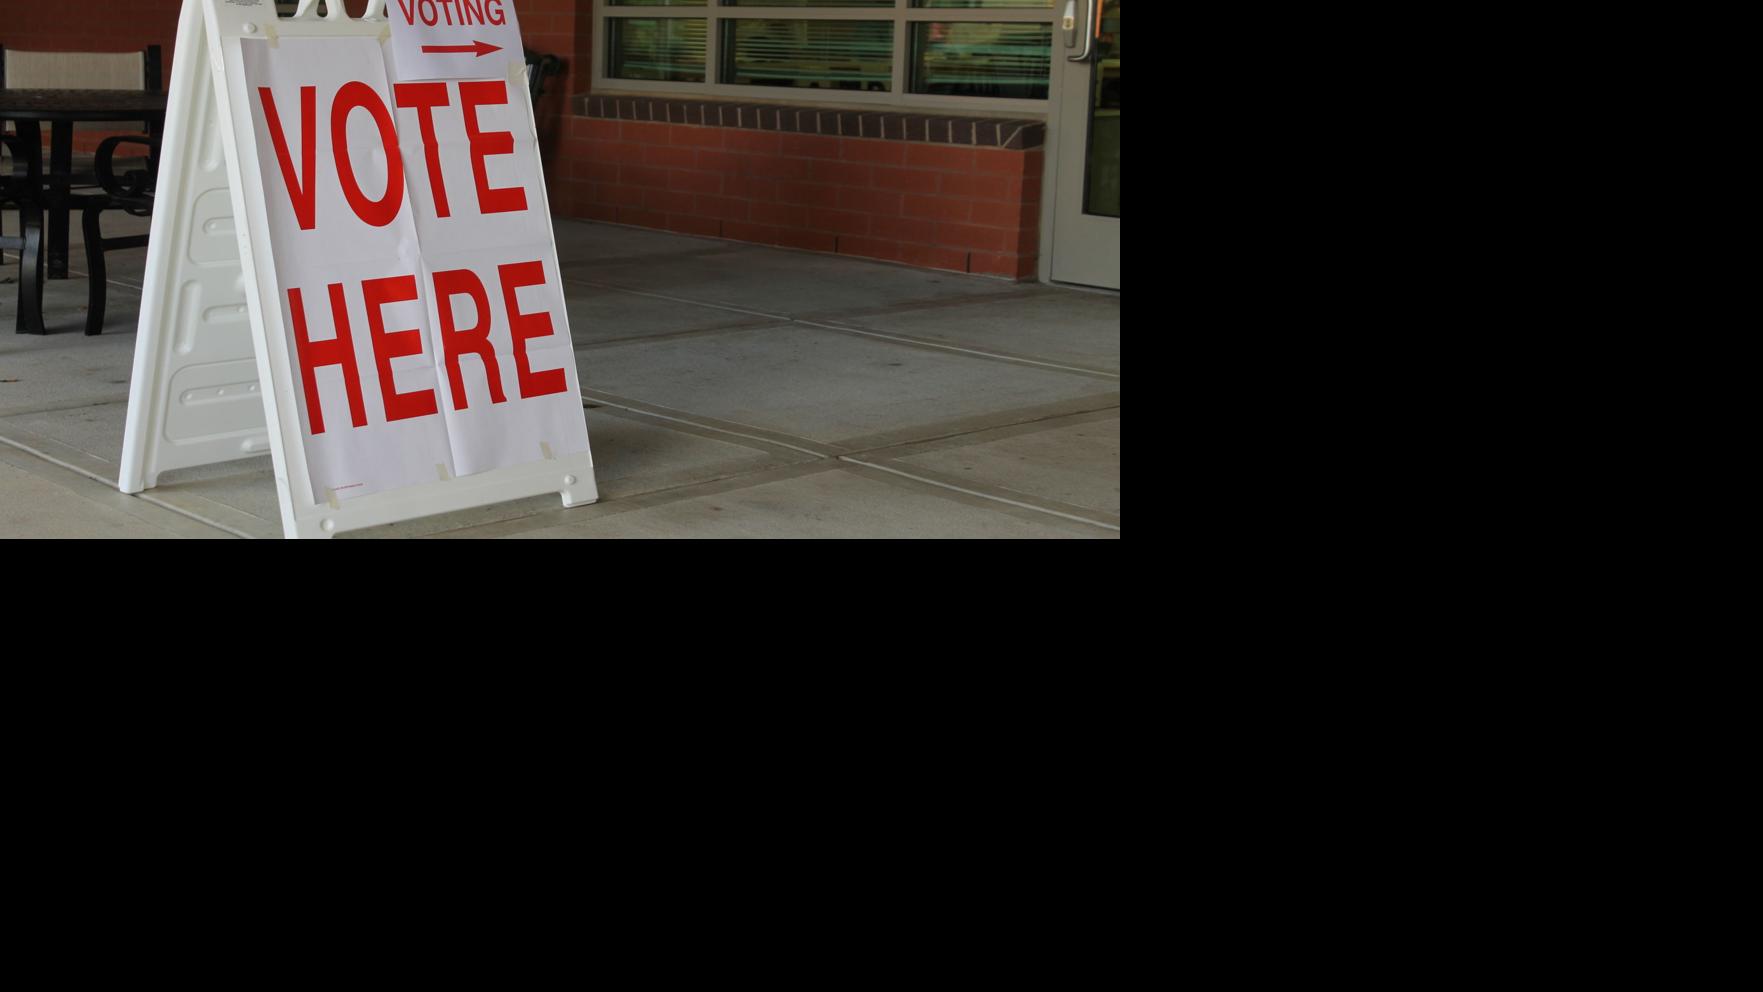 A look at the statewide amendments on Alabama ballots | Local News ...